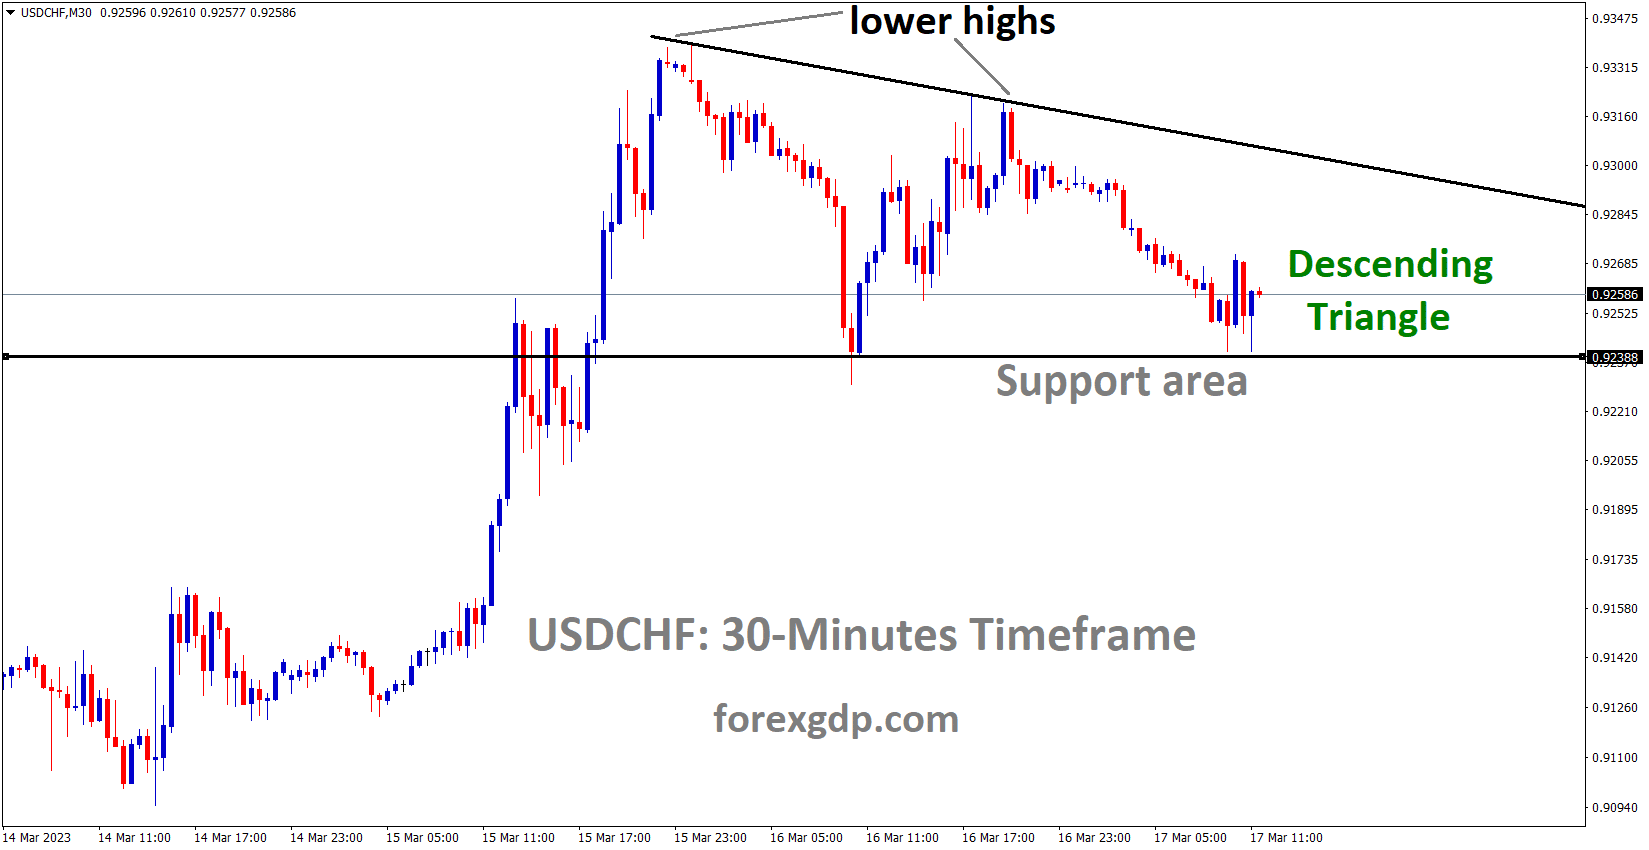 USDCHF is moving in the Descending triangle pattern and the market has reached the horizontal support area of the pattern